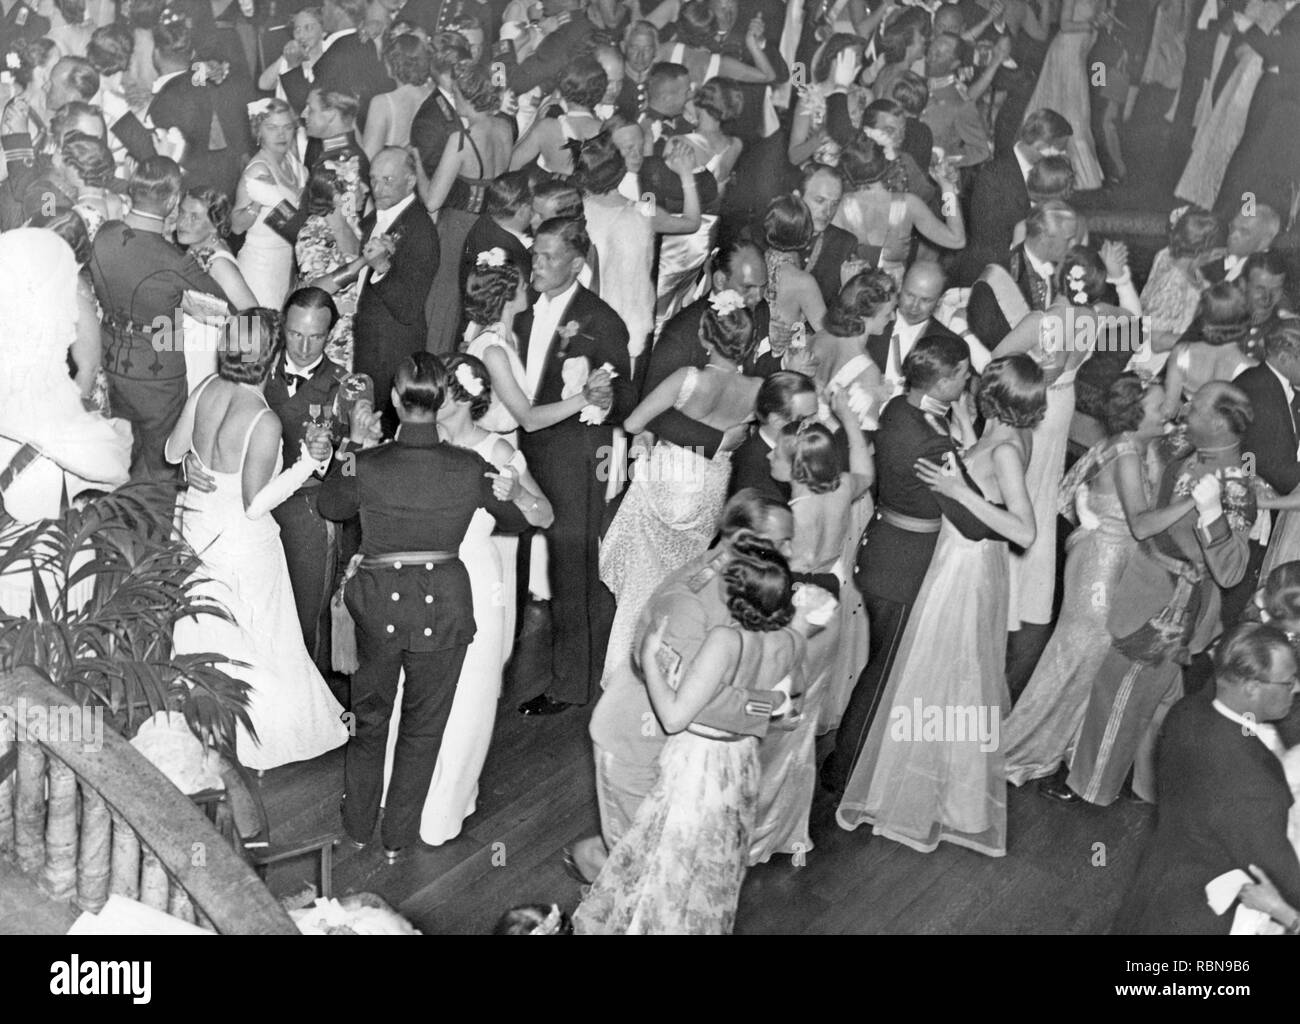 Dancing In The 1940s The Dance Floor Is Filled With Well Dressed Dancing Couples Moving To The